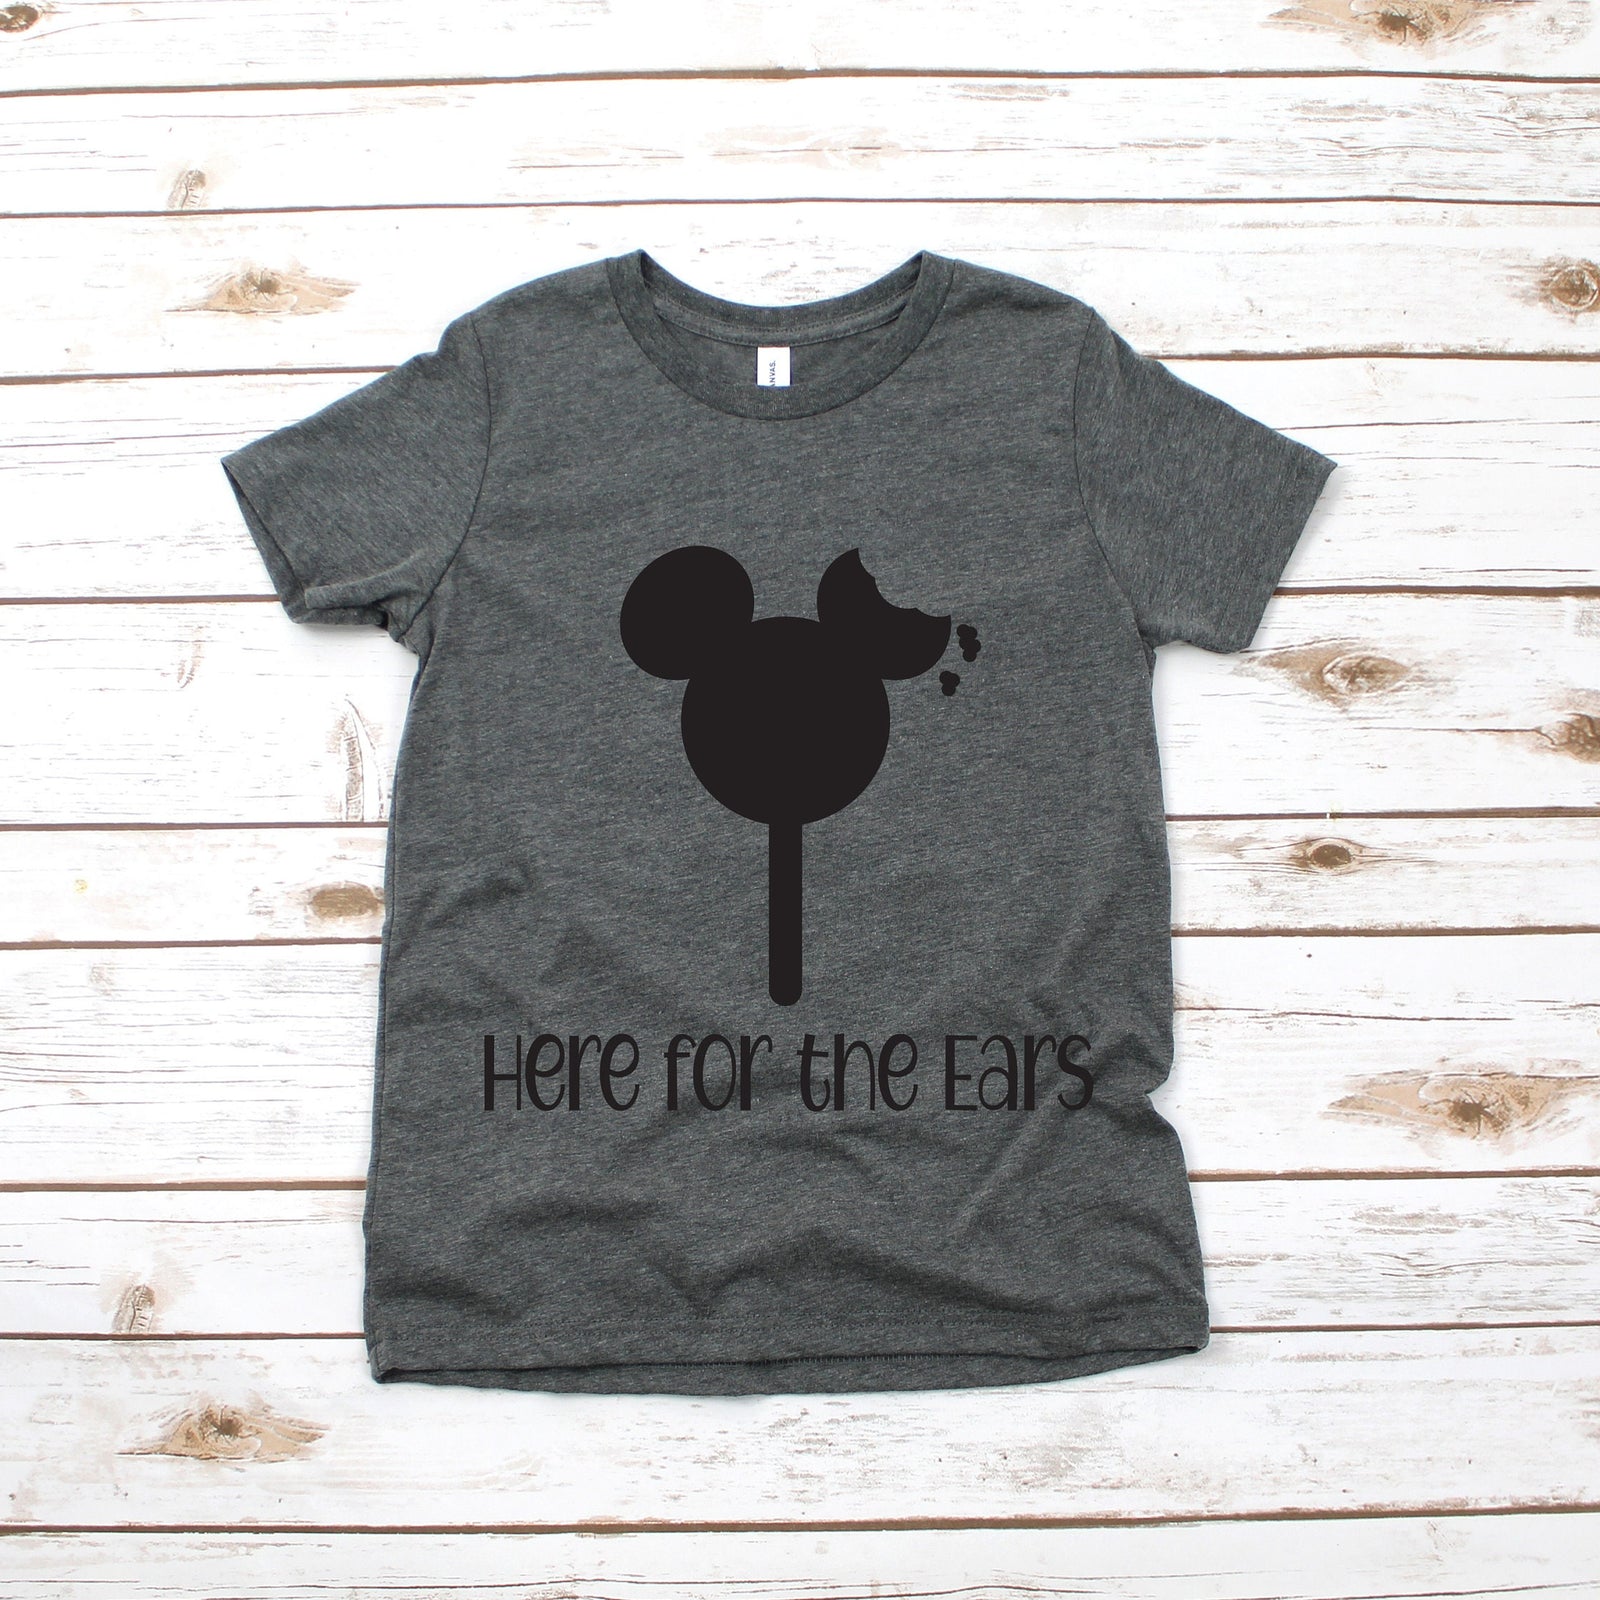 Here for the Ears Mickey Mouse Ice Cream  Kids T Shirt - Infant Toddler Youth Mickey Shirt - Disney Kids Snack Goals Shirt